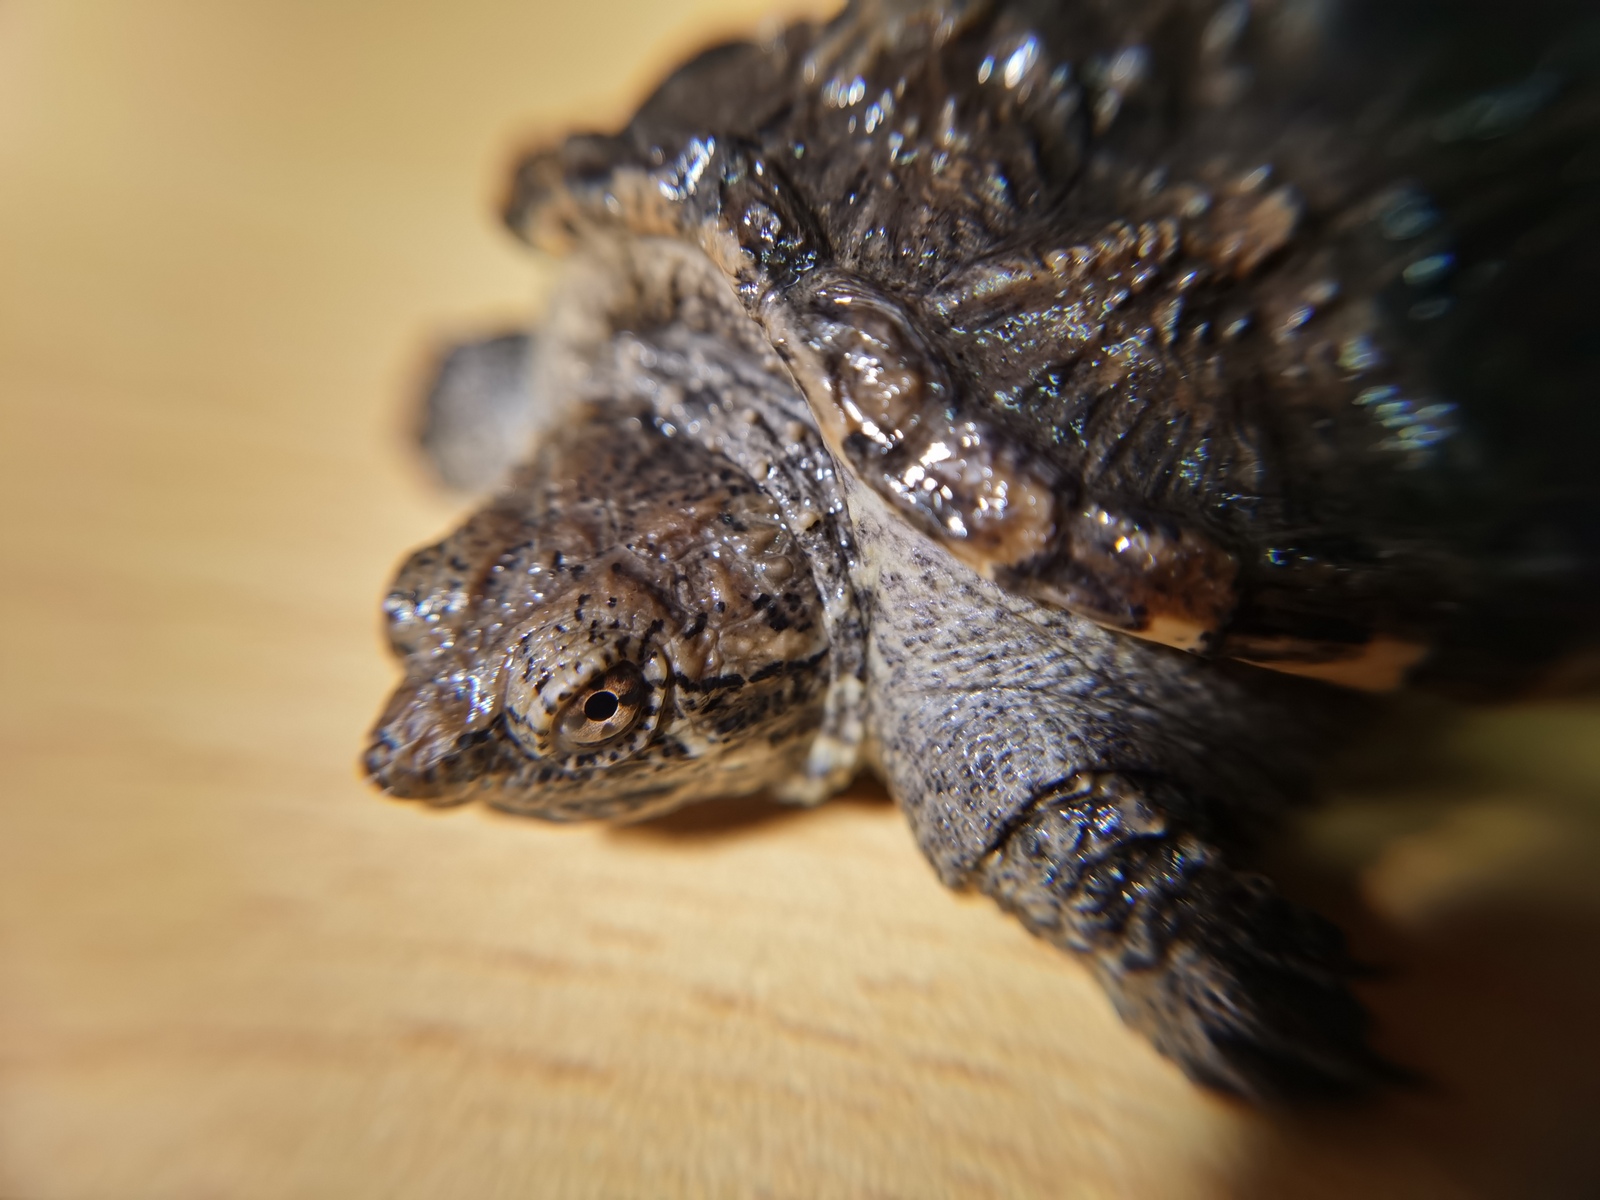 snapping-turtle-and-grass-tortoise-1.jpg